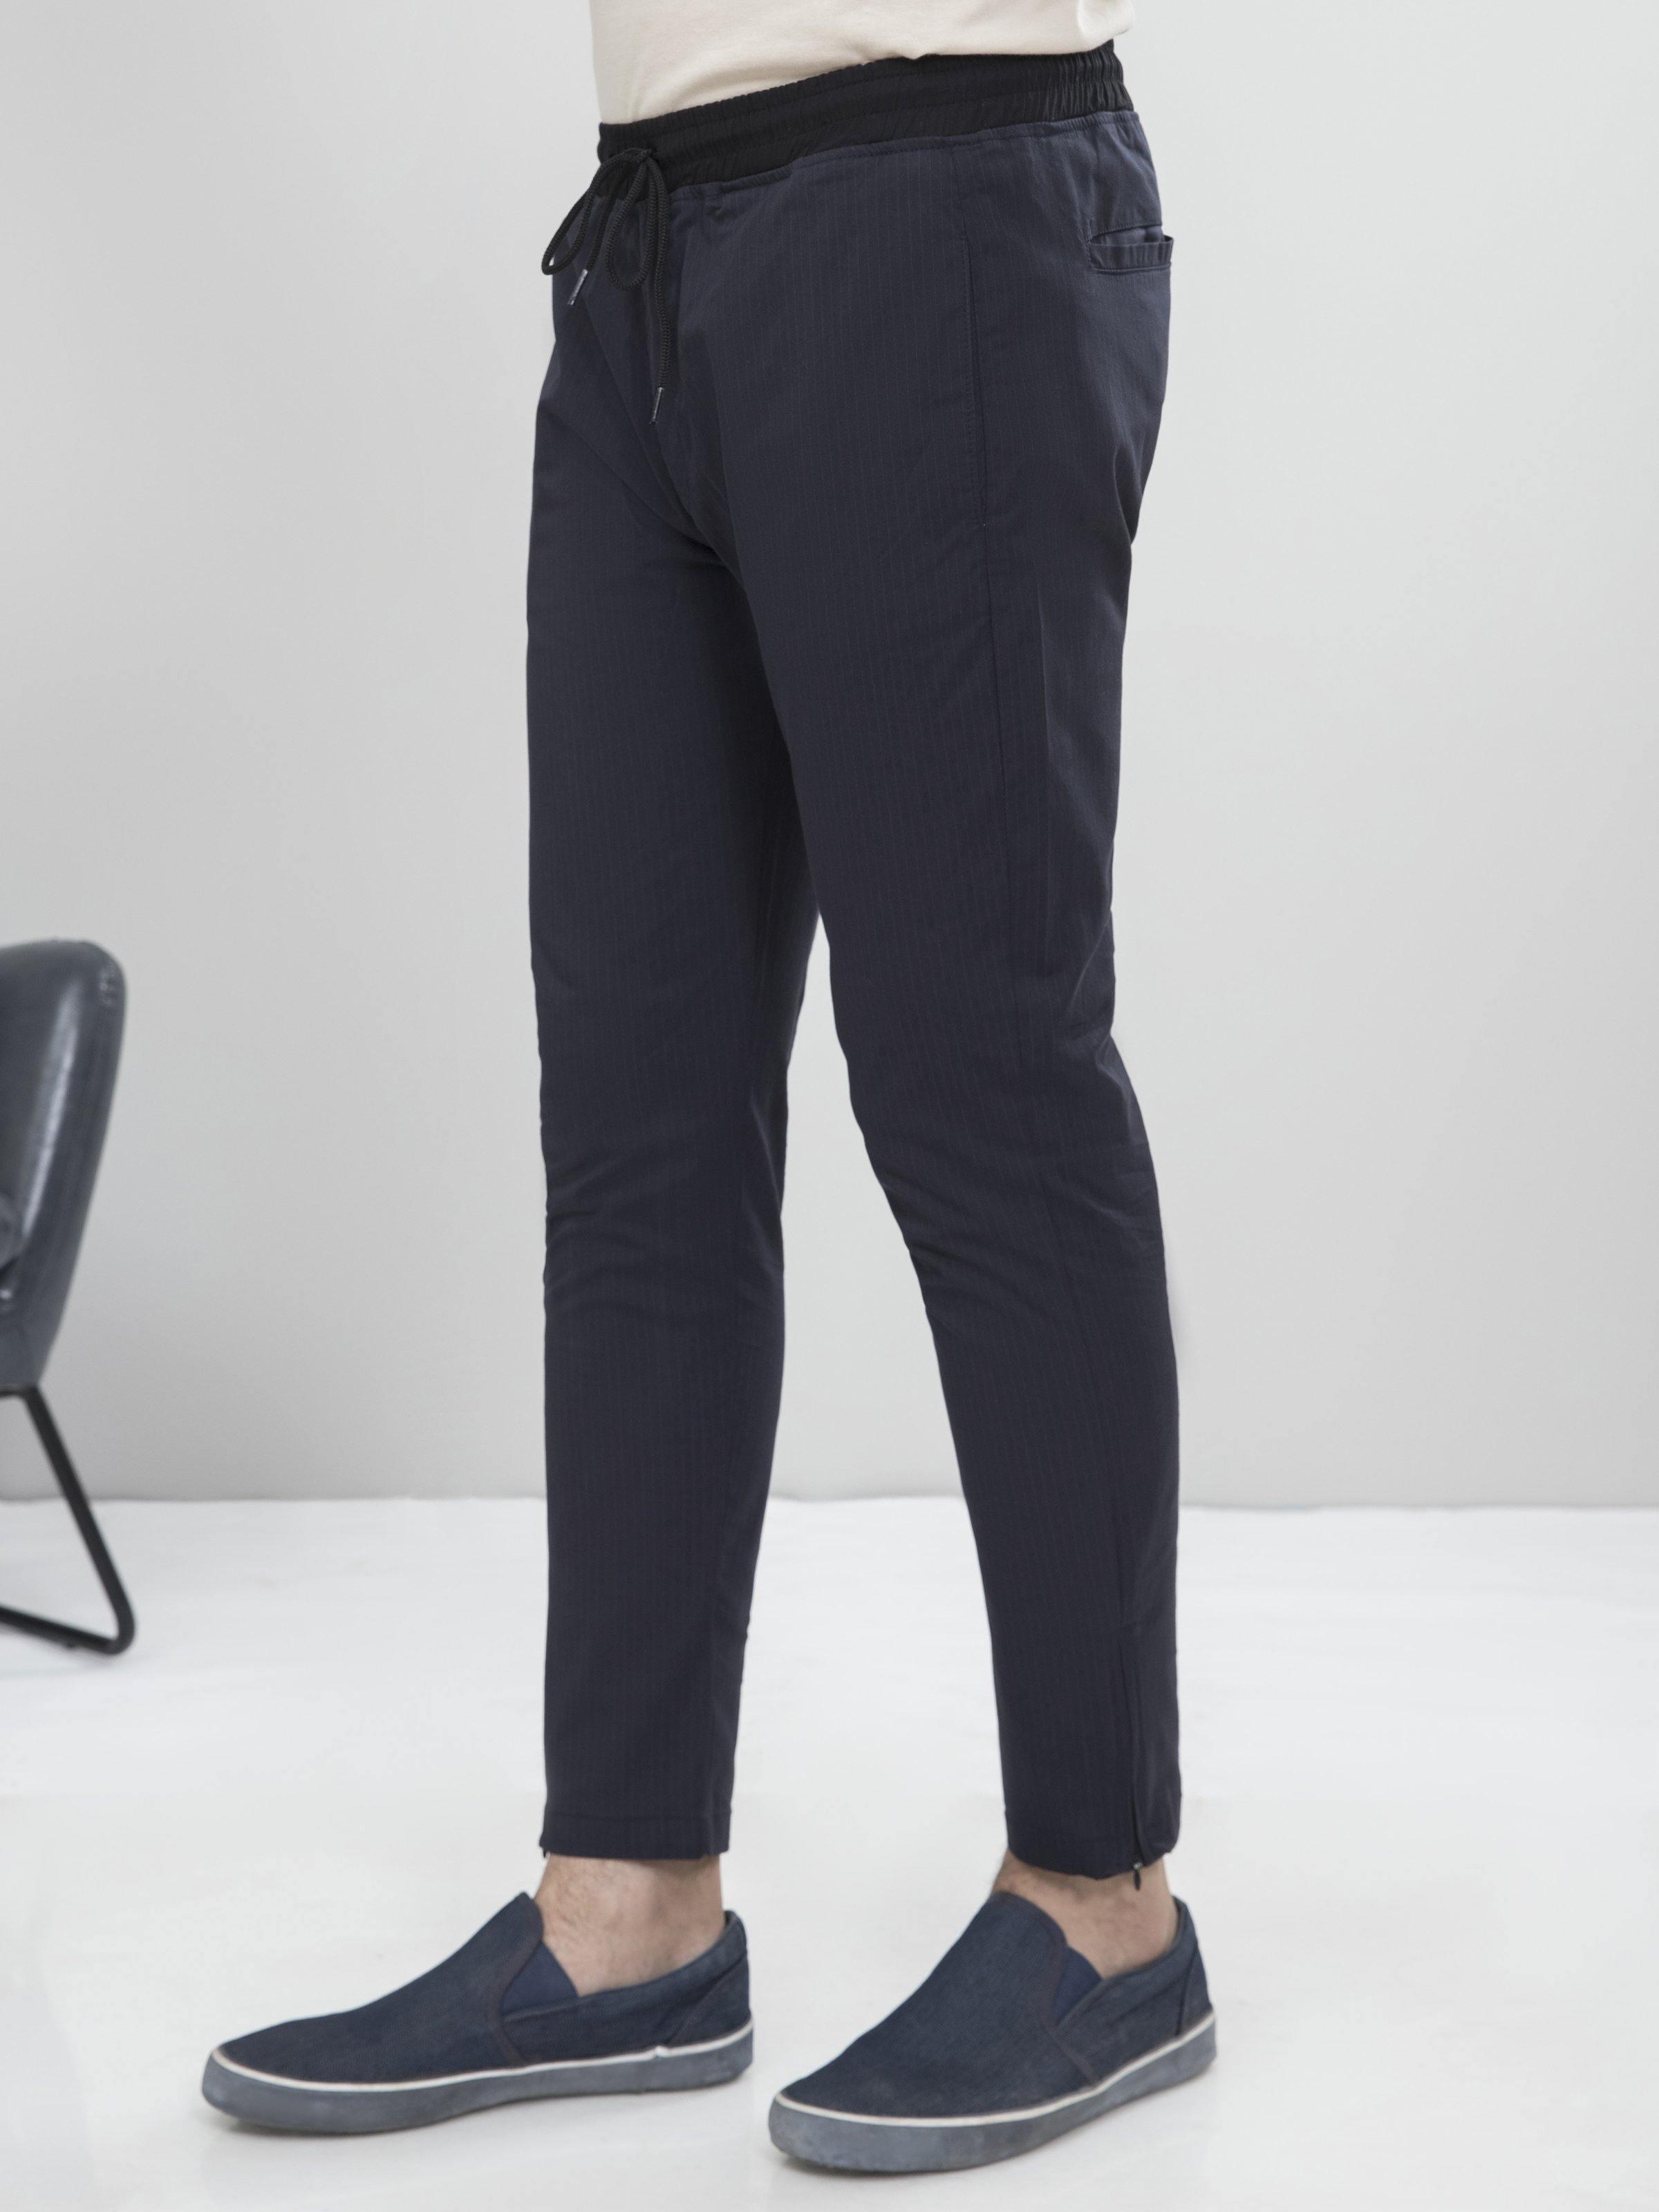 CASUAL TROUSER TAPERED FIT BLUE GREY at Charcoal Clothing